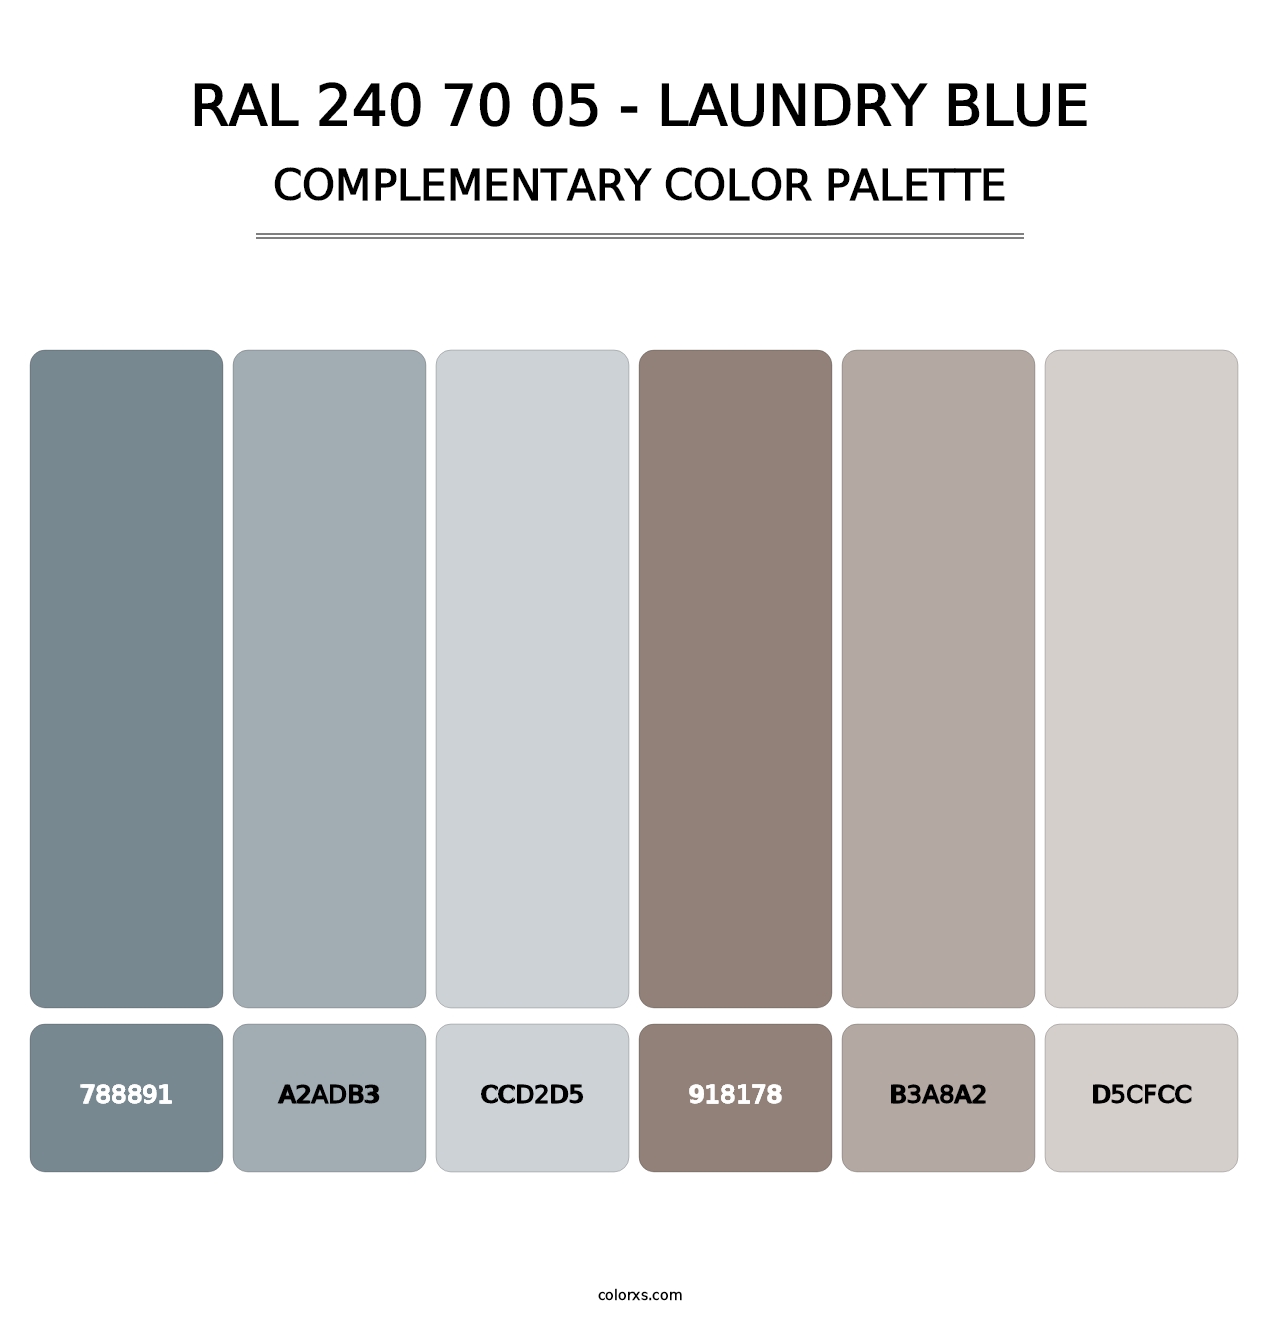 RAL 240 70 05 - Laundry Blue - Complementary Color Palette